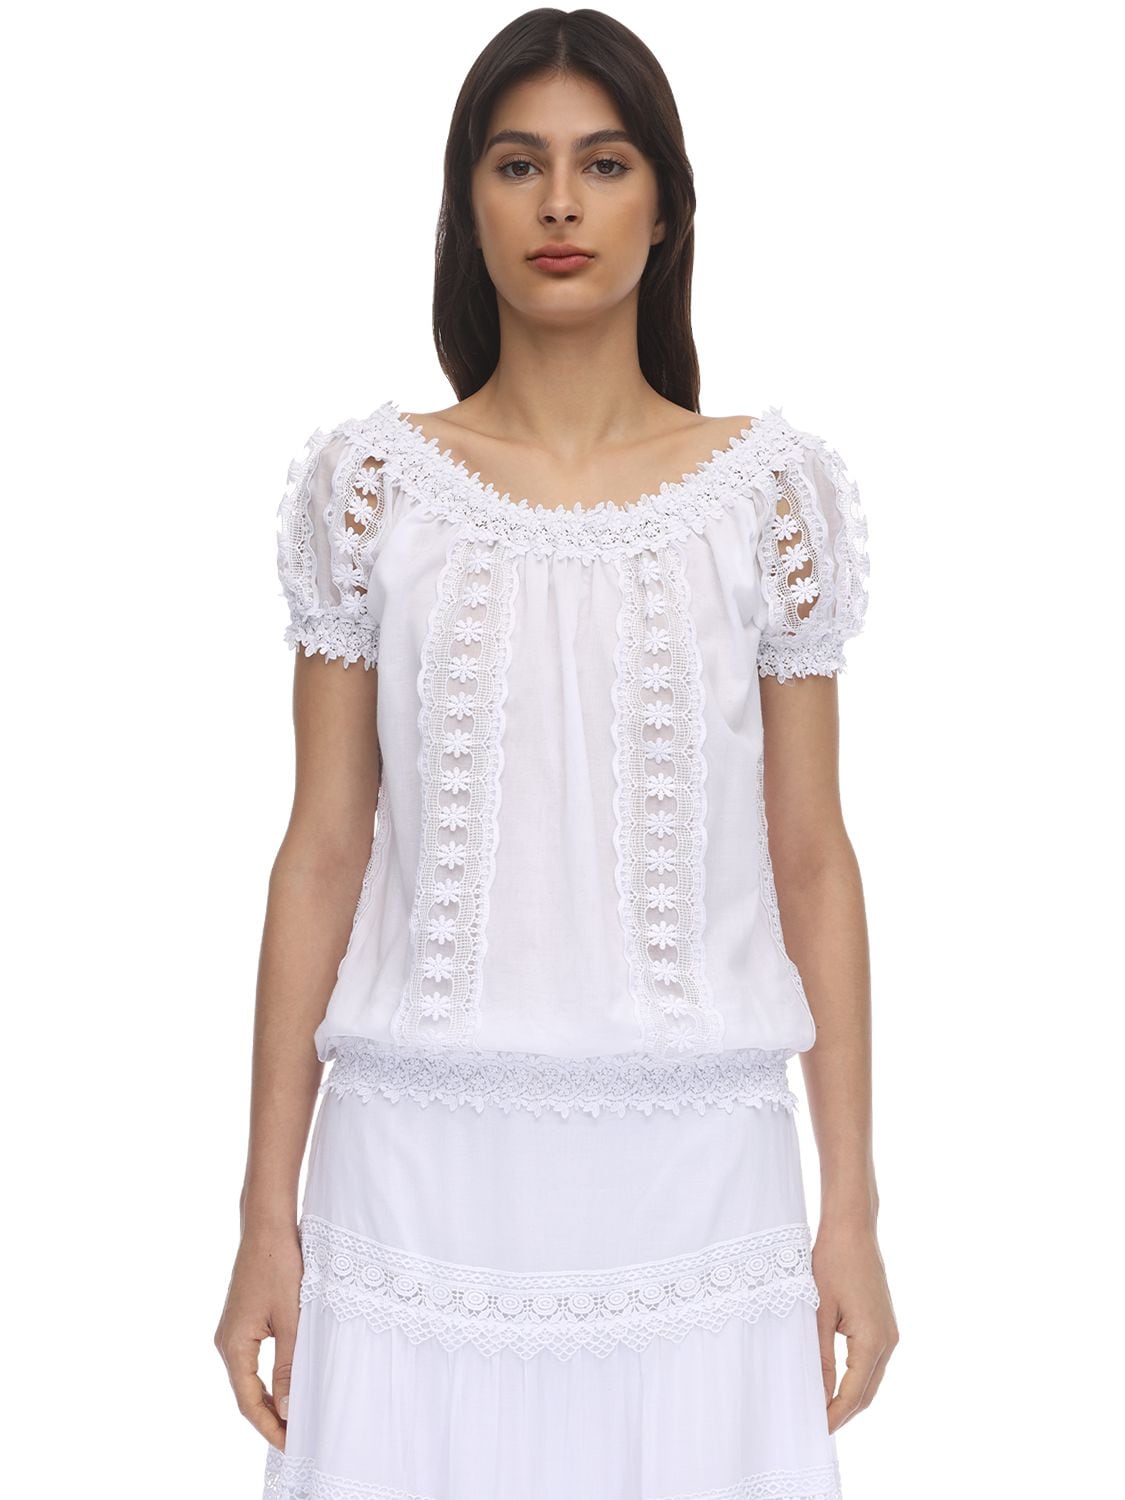 Charo Ruiz Maca Embellished Cotton Lace Top In White